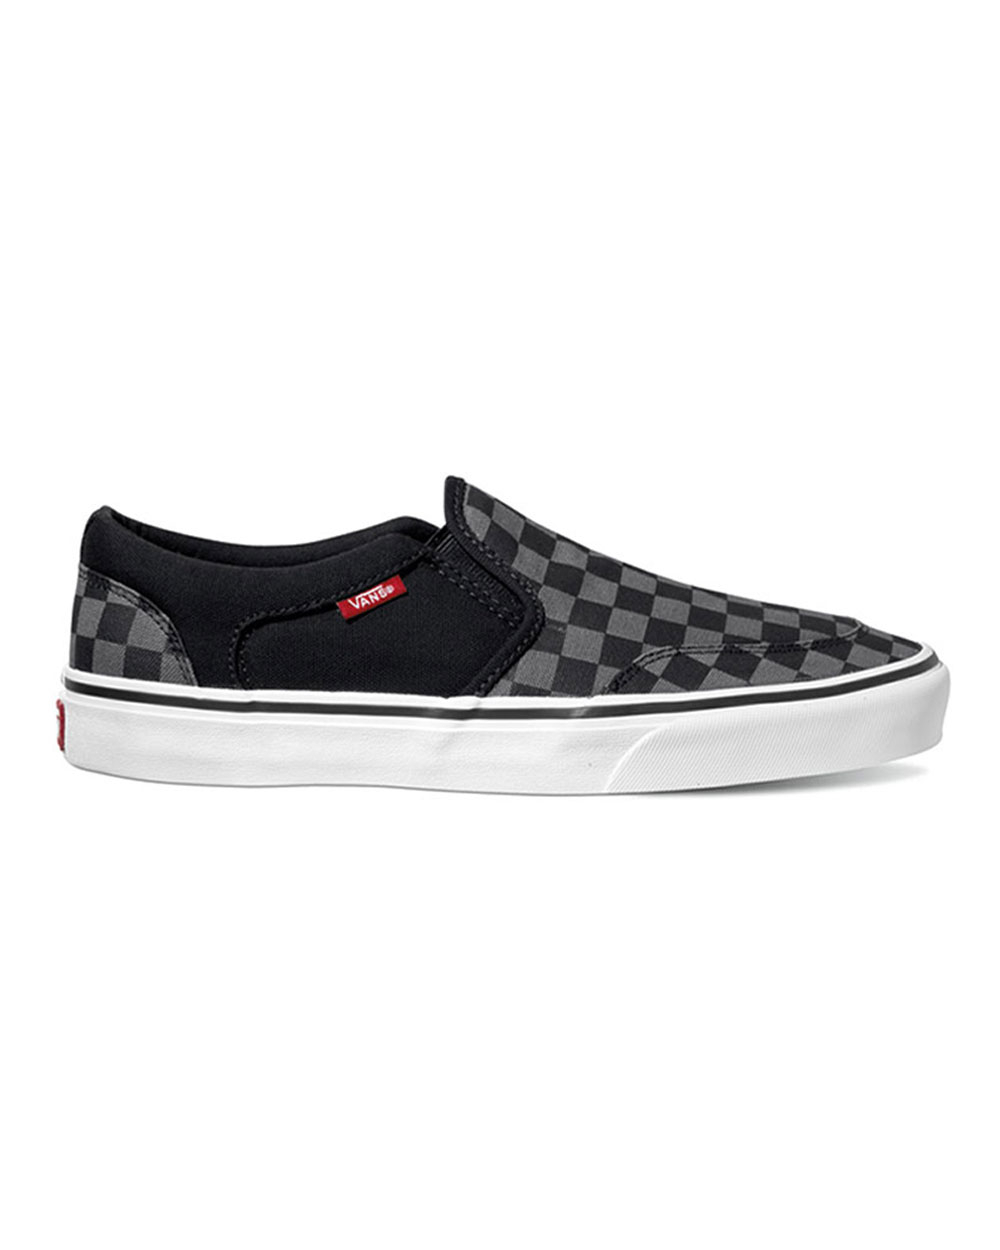 Vans Asher Checkers (black/pewter 